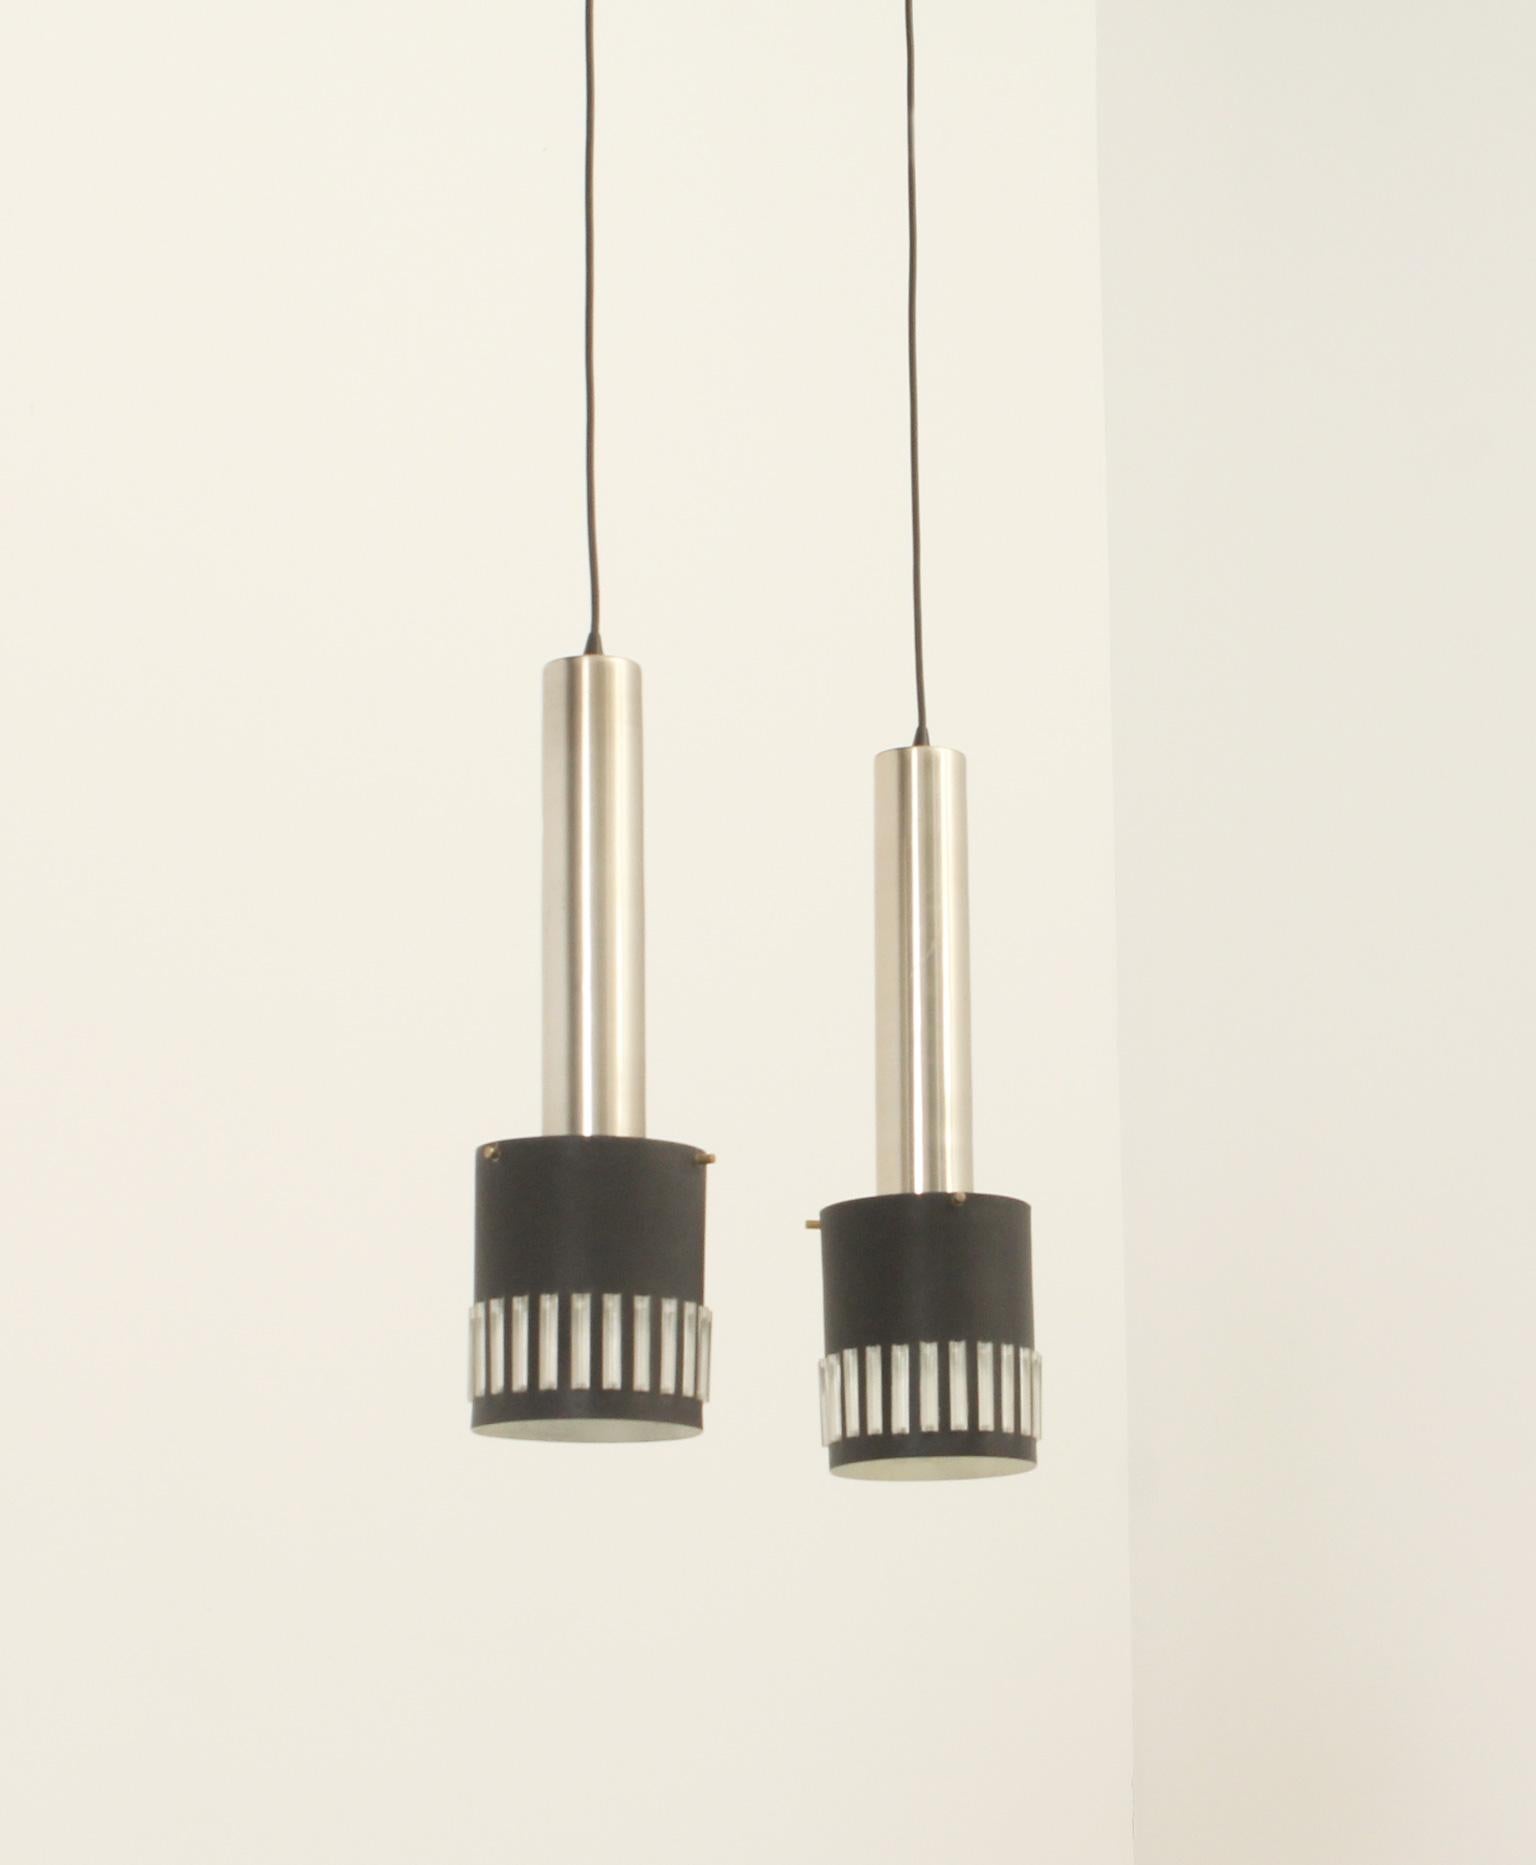 Pair of Pendant Lamps from 1960's, Spain For Sale 5